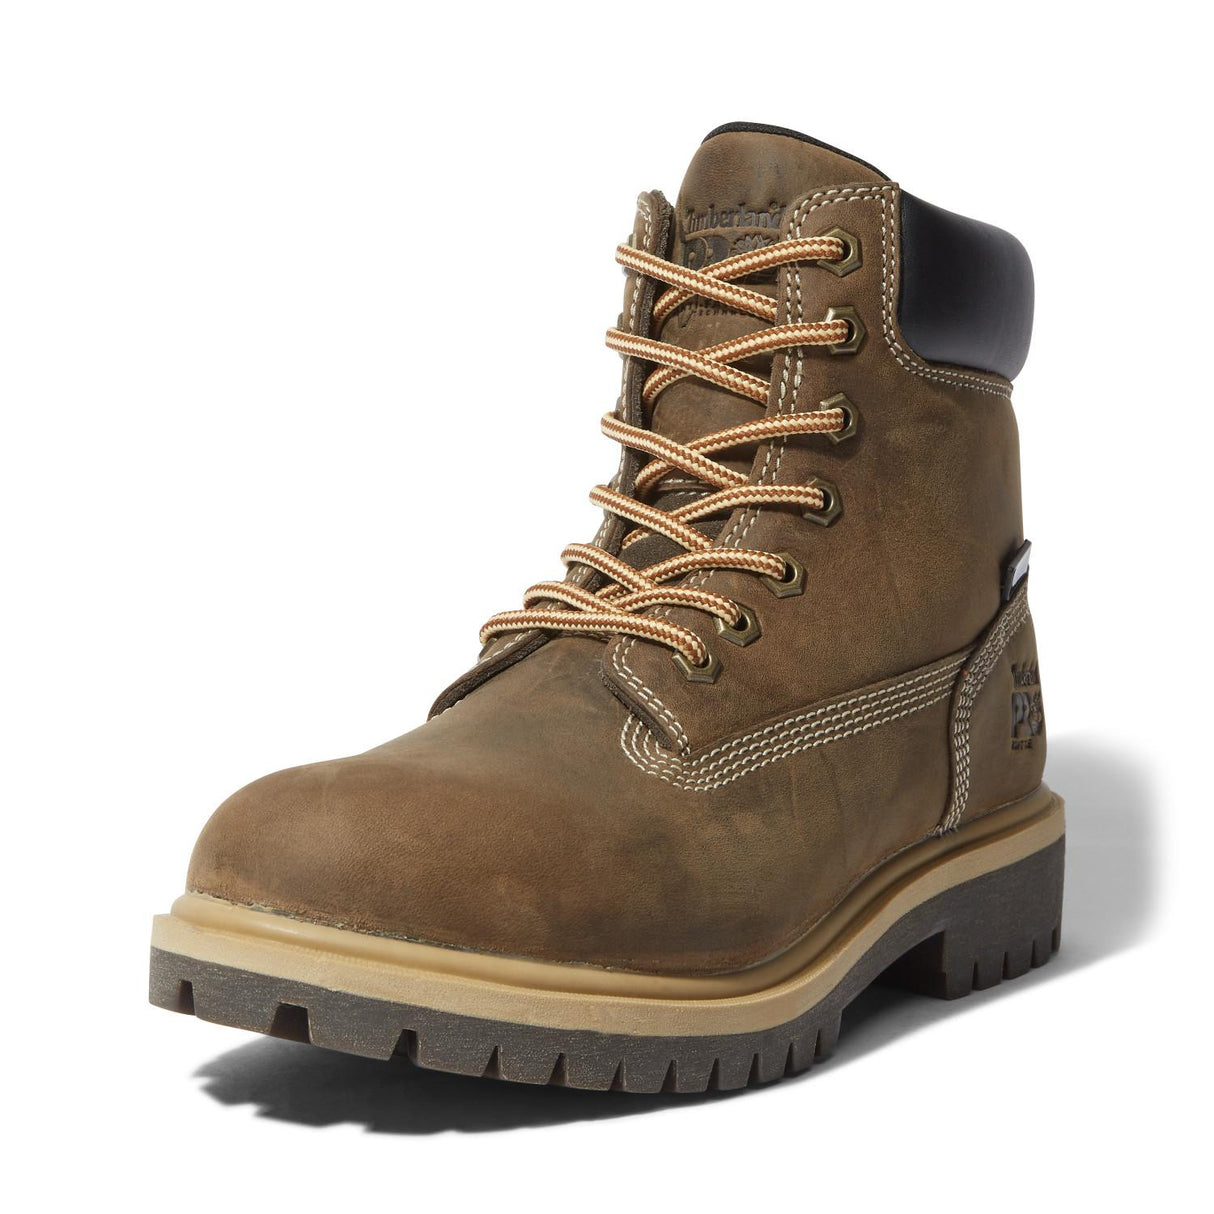 Timberland Pro-Women's 6 In Direct Attach Waterproof Ins 200G Brown-Steel Toes-7